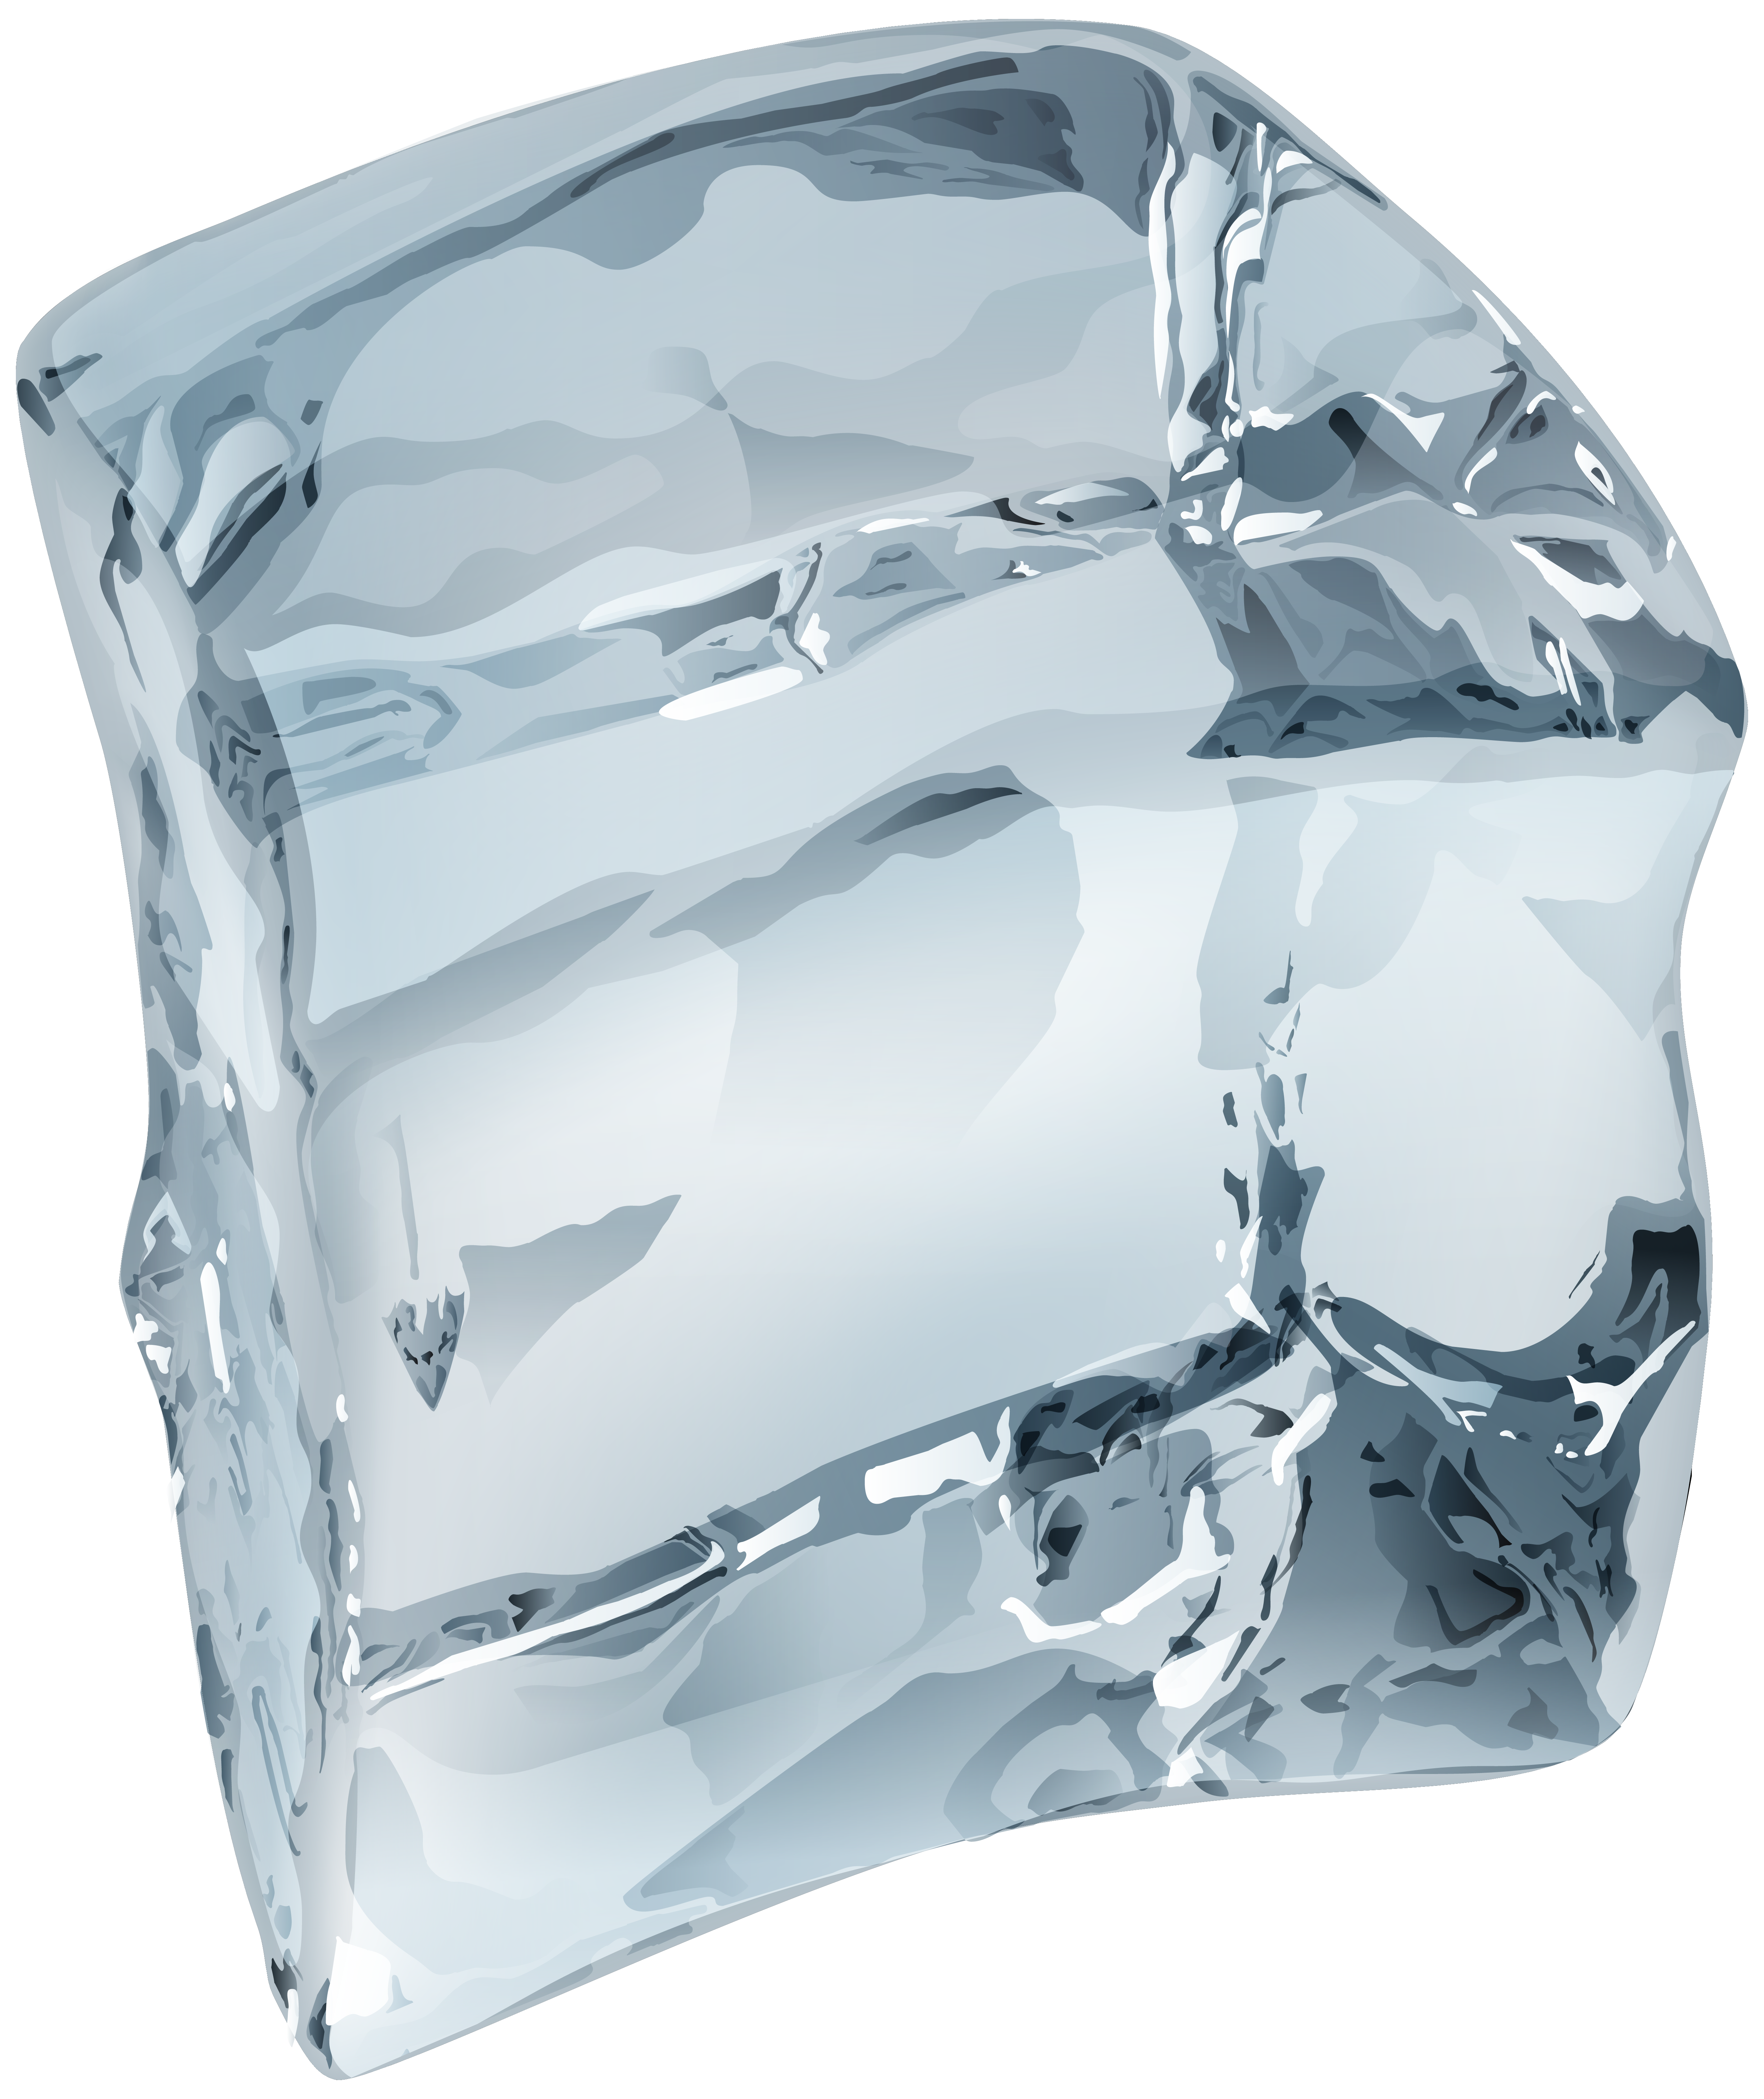 Big Piece Of Ice, Piece, Big, Ice PNG Transparent Image and Clipart for  Free Download